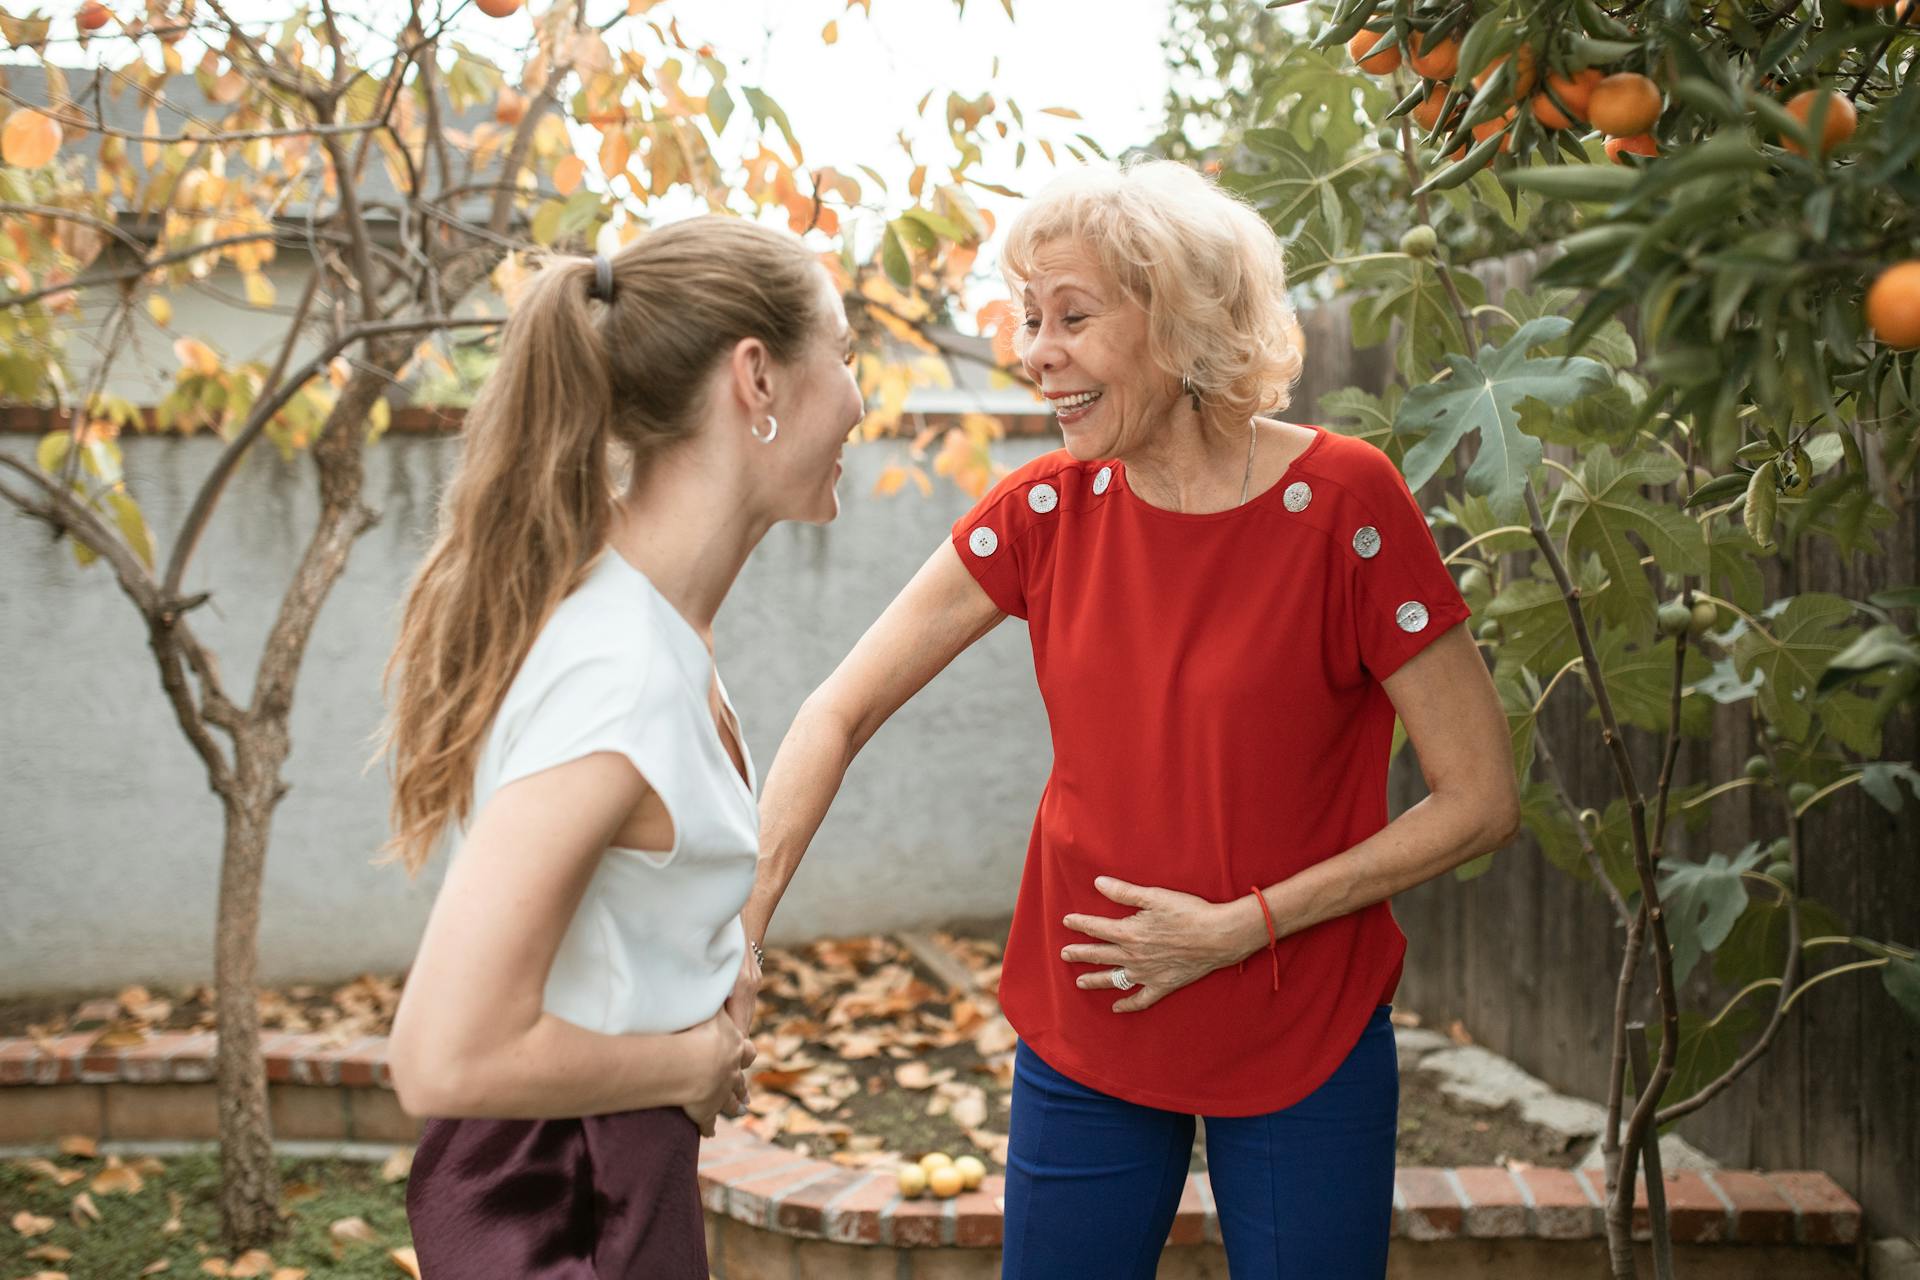 A blonde woman with a ponytail chatting with a senior lady in the garden | Source: Pexels